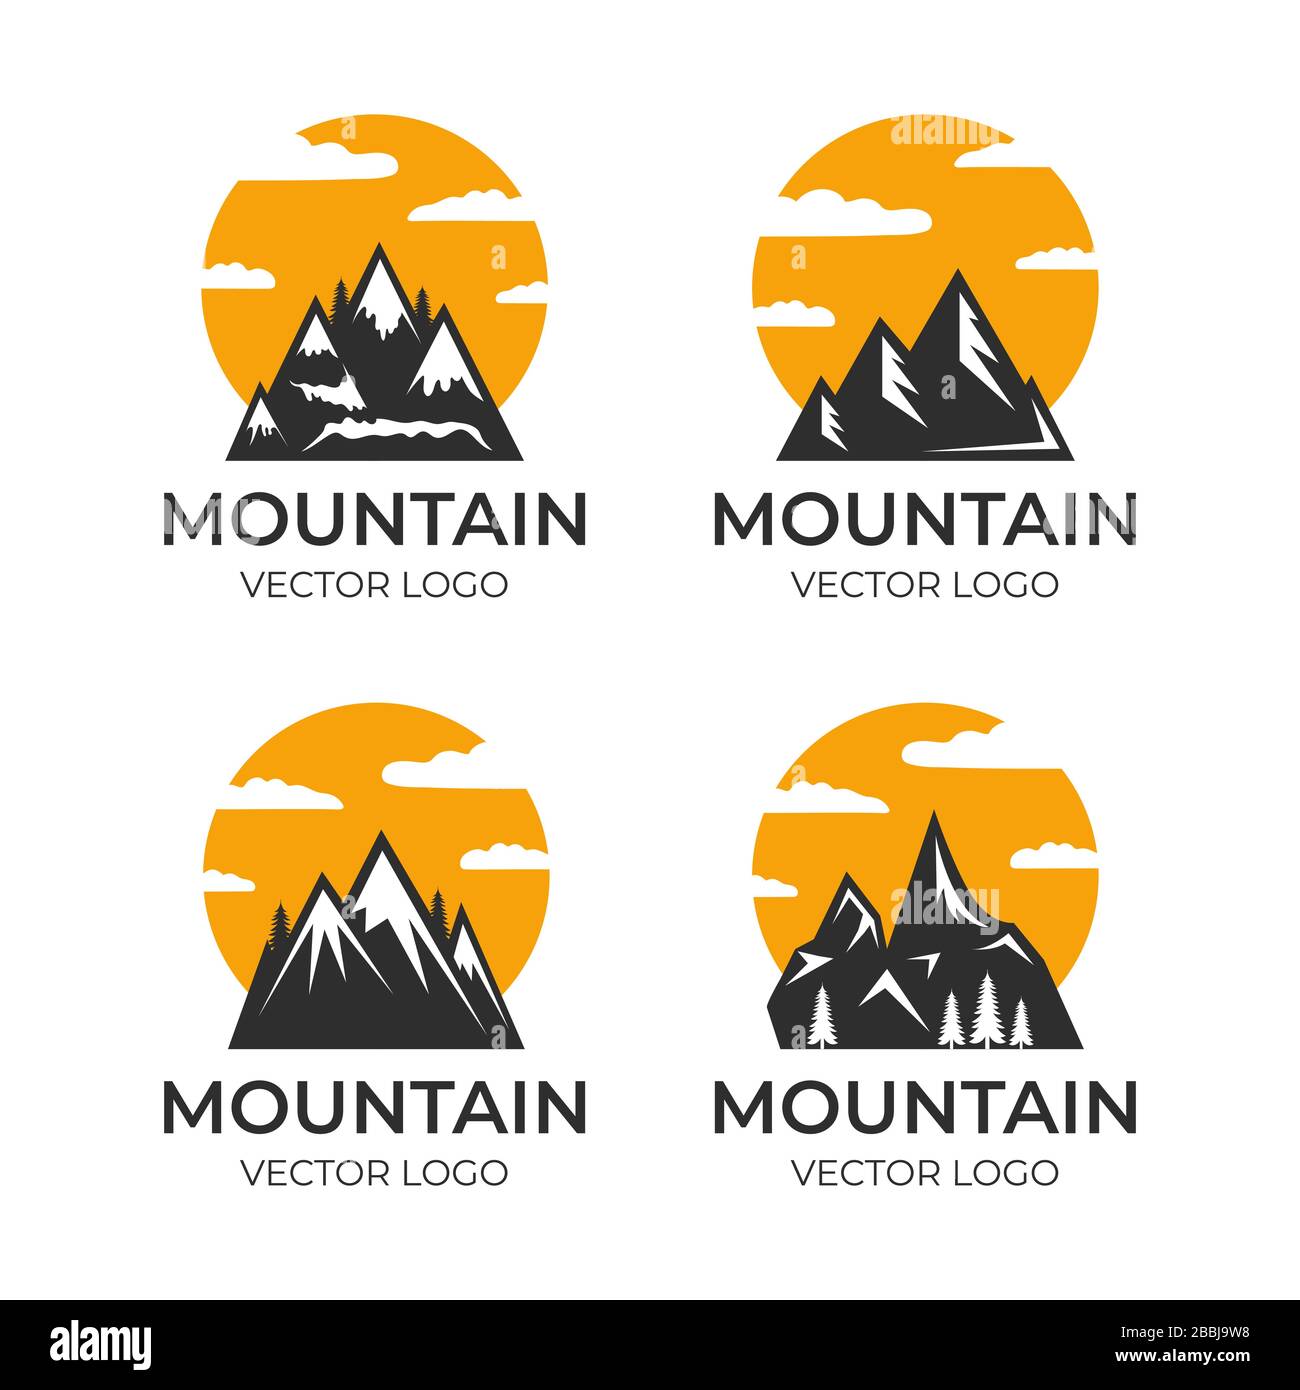 Mountain vector logo design. Silhouettes of rock mountains with cloudy sky. Outdoor activity, traveling in alps, living on nature outdoor, camping, hiking on mount hill badges templates. Stock Vector